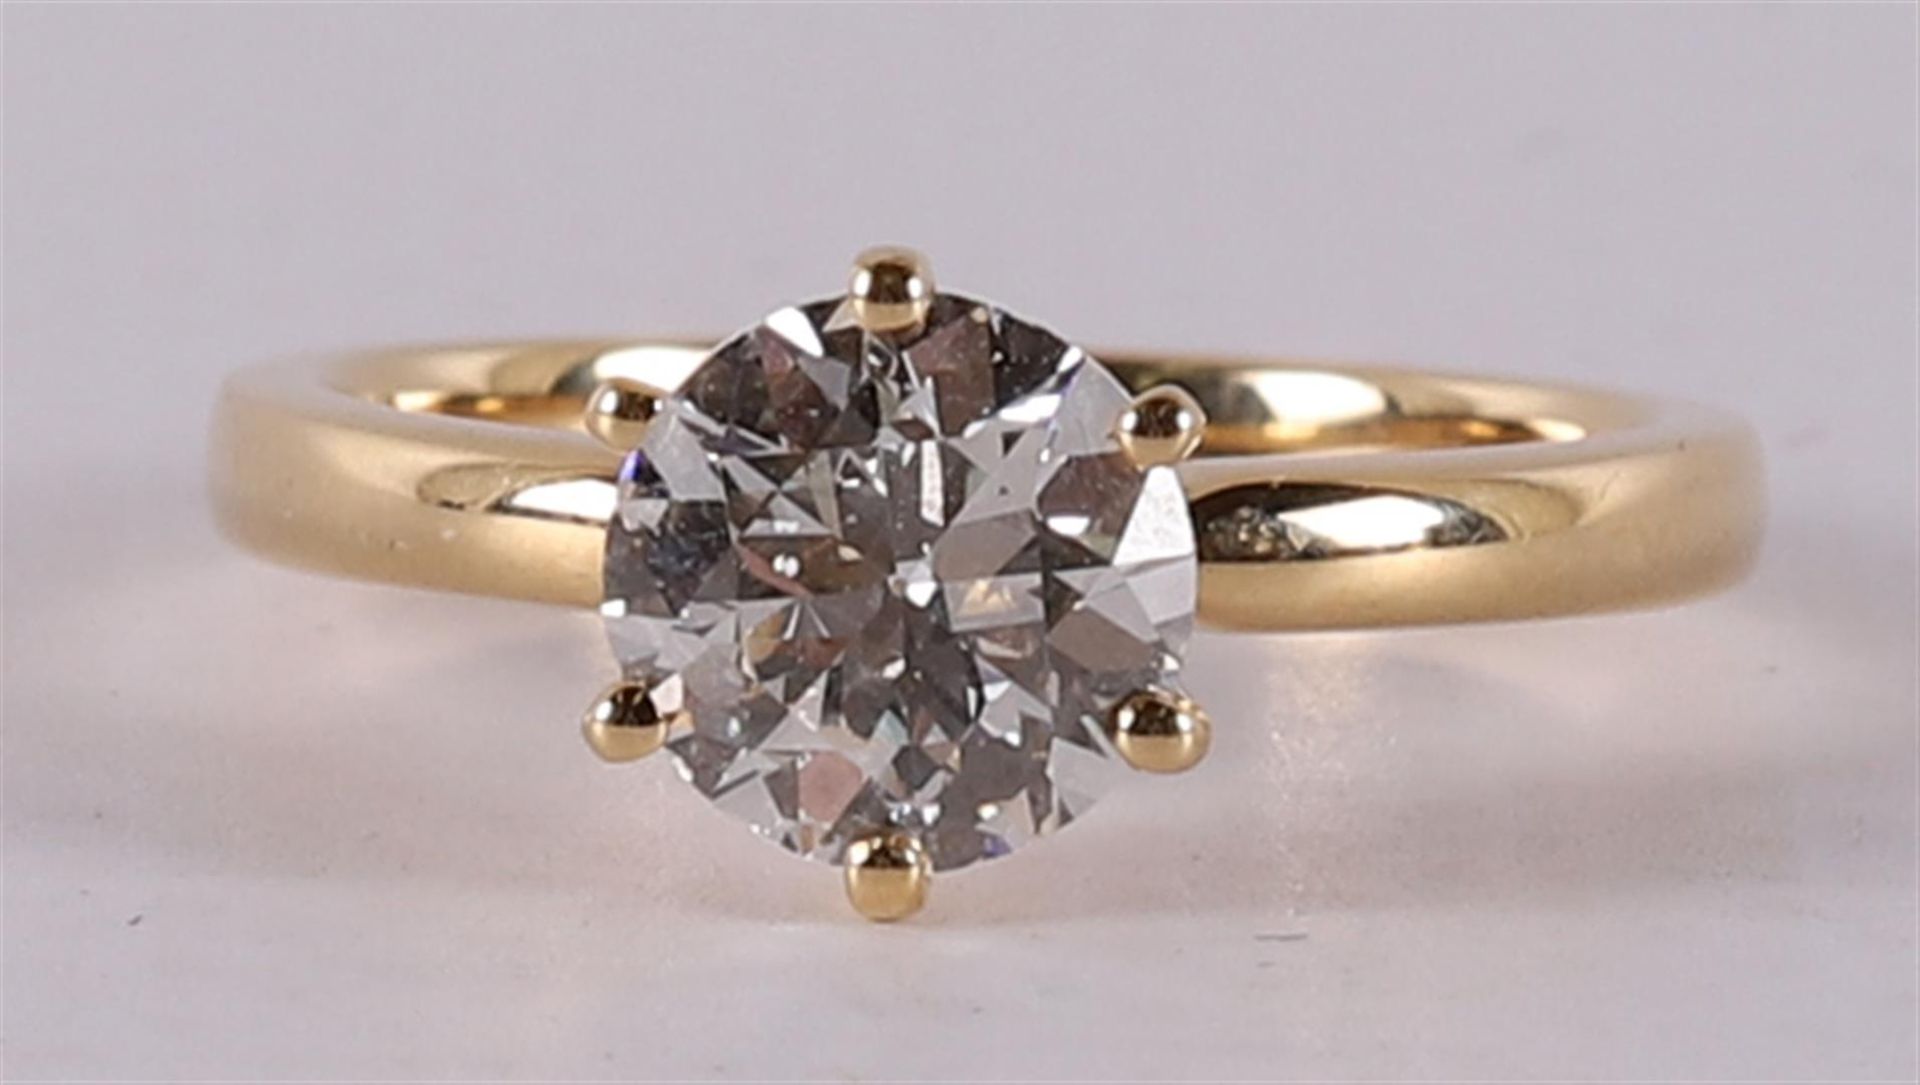 An 18 kt yellow gold women's ring, set with 1.63 crt brilliant cut diamonds. - Image 3 of 6